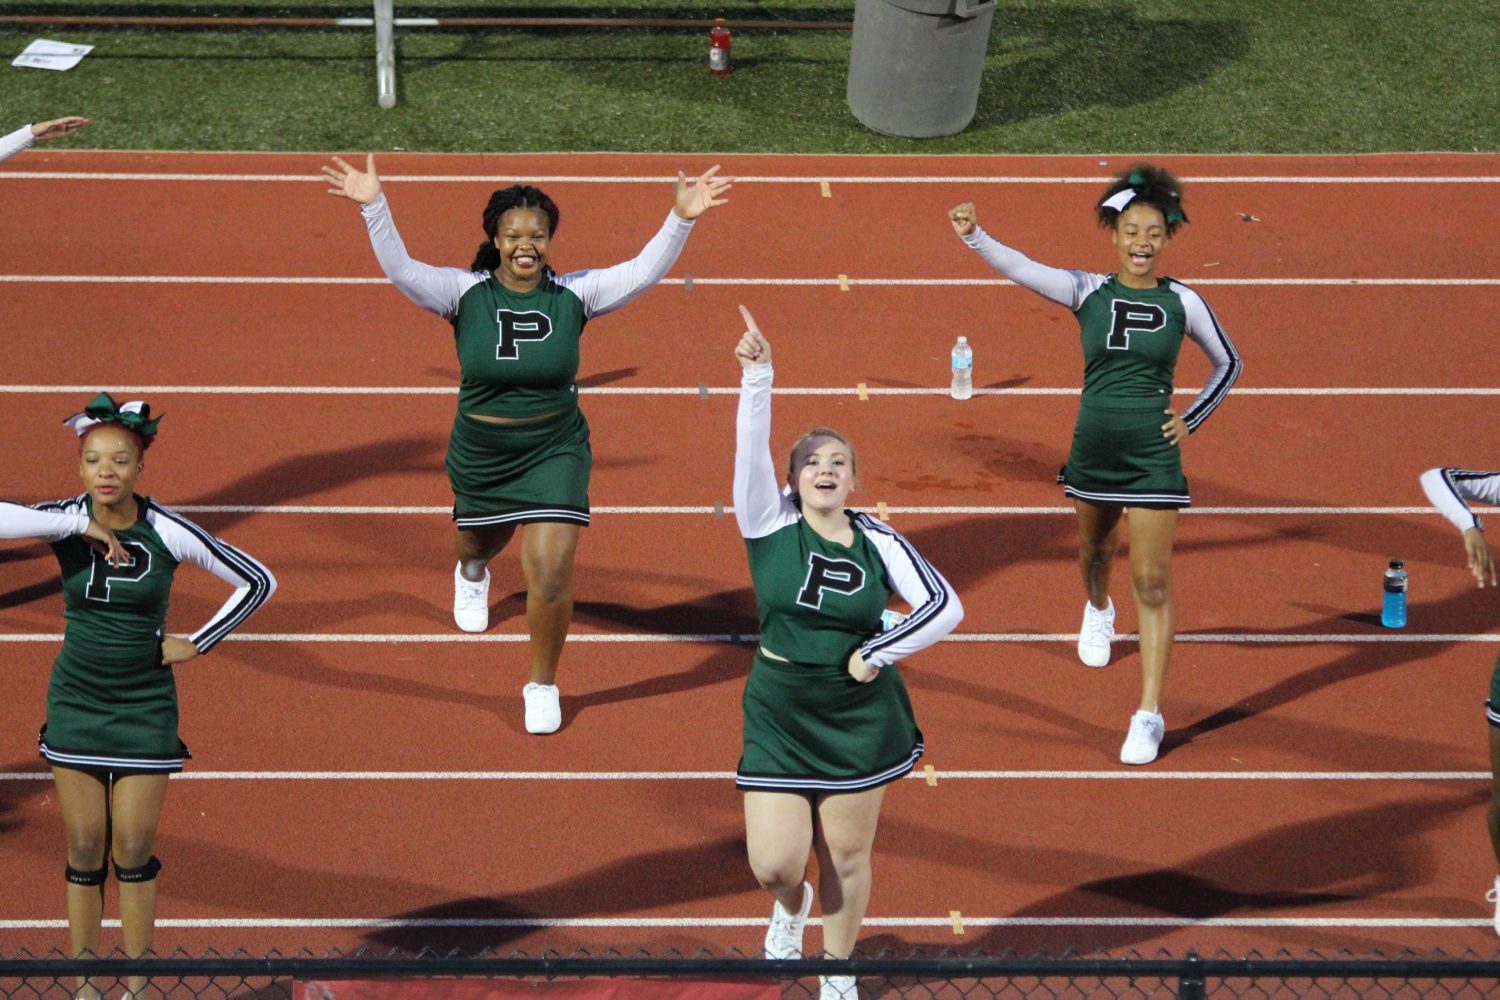 JV cheerleaders were on the track during Homecoming football game